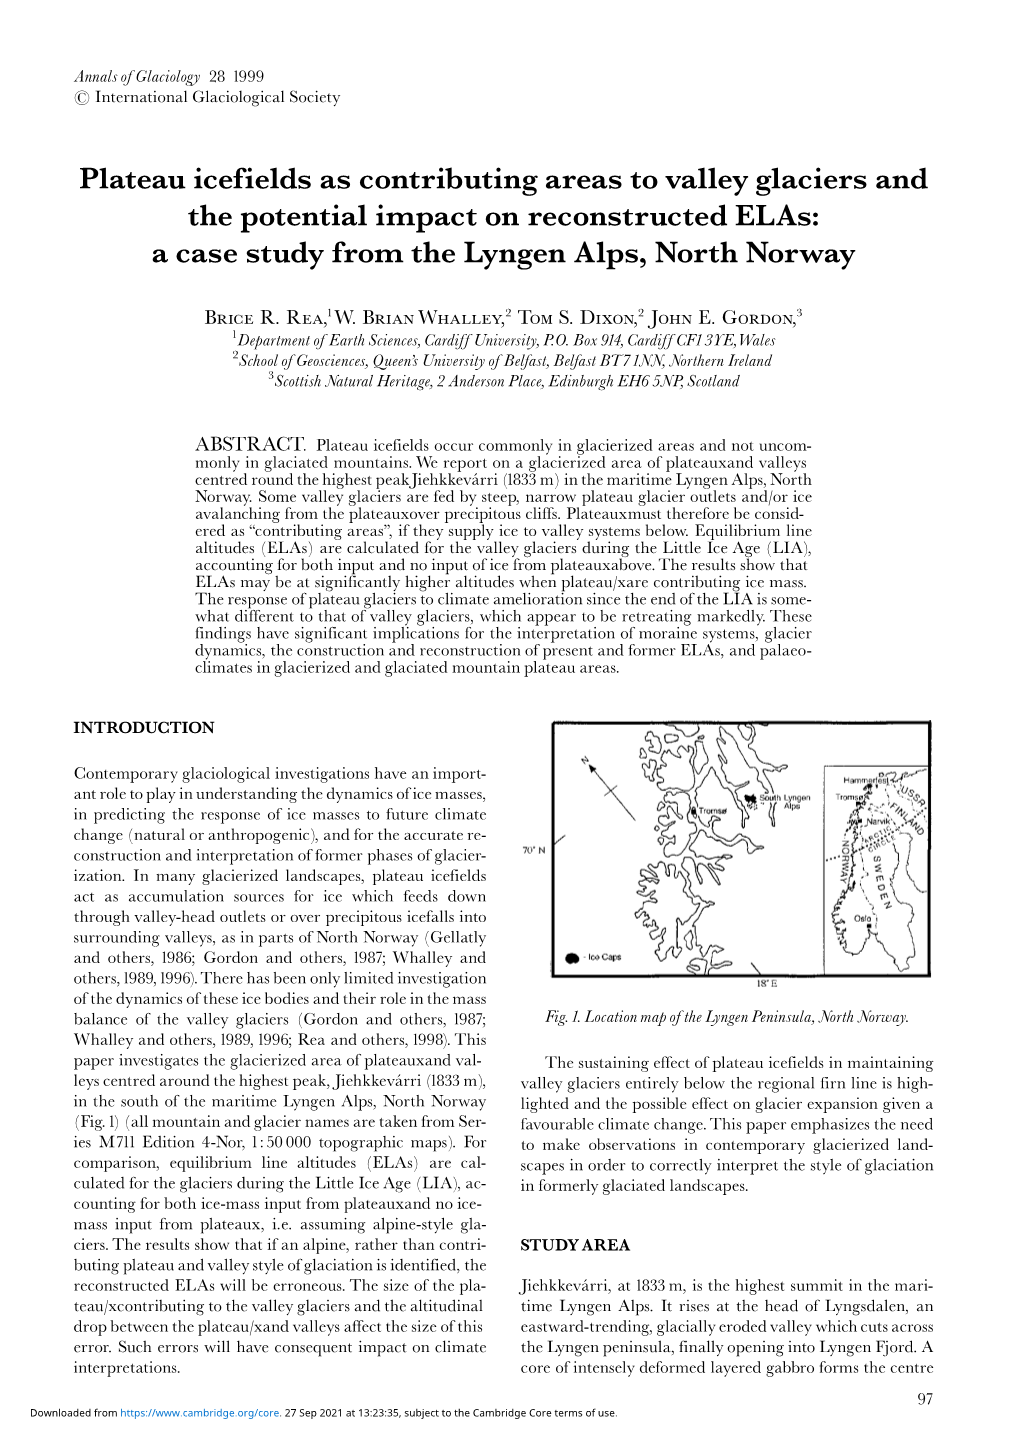 Plateau Icefields As Contributing Areas to Valley Glaciers and the Potential Impact on Reconstructed Elas: a Case Study from the Lyngen Alps, North Norway